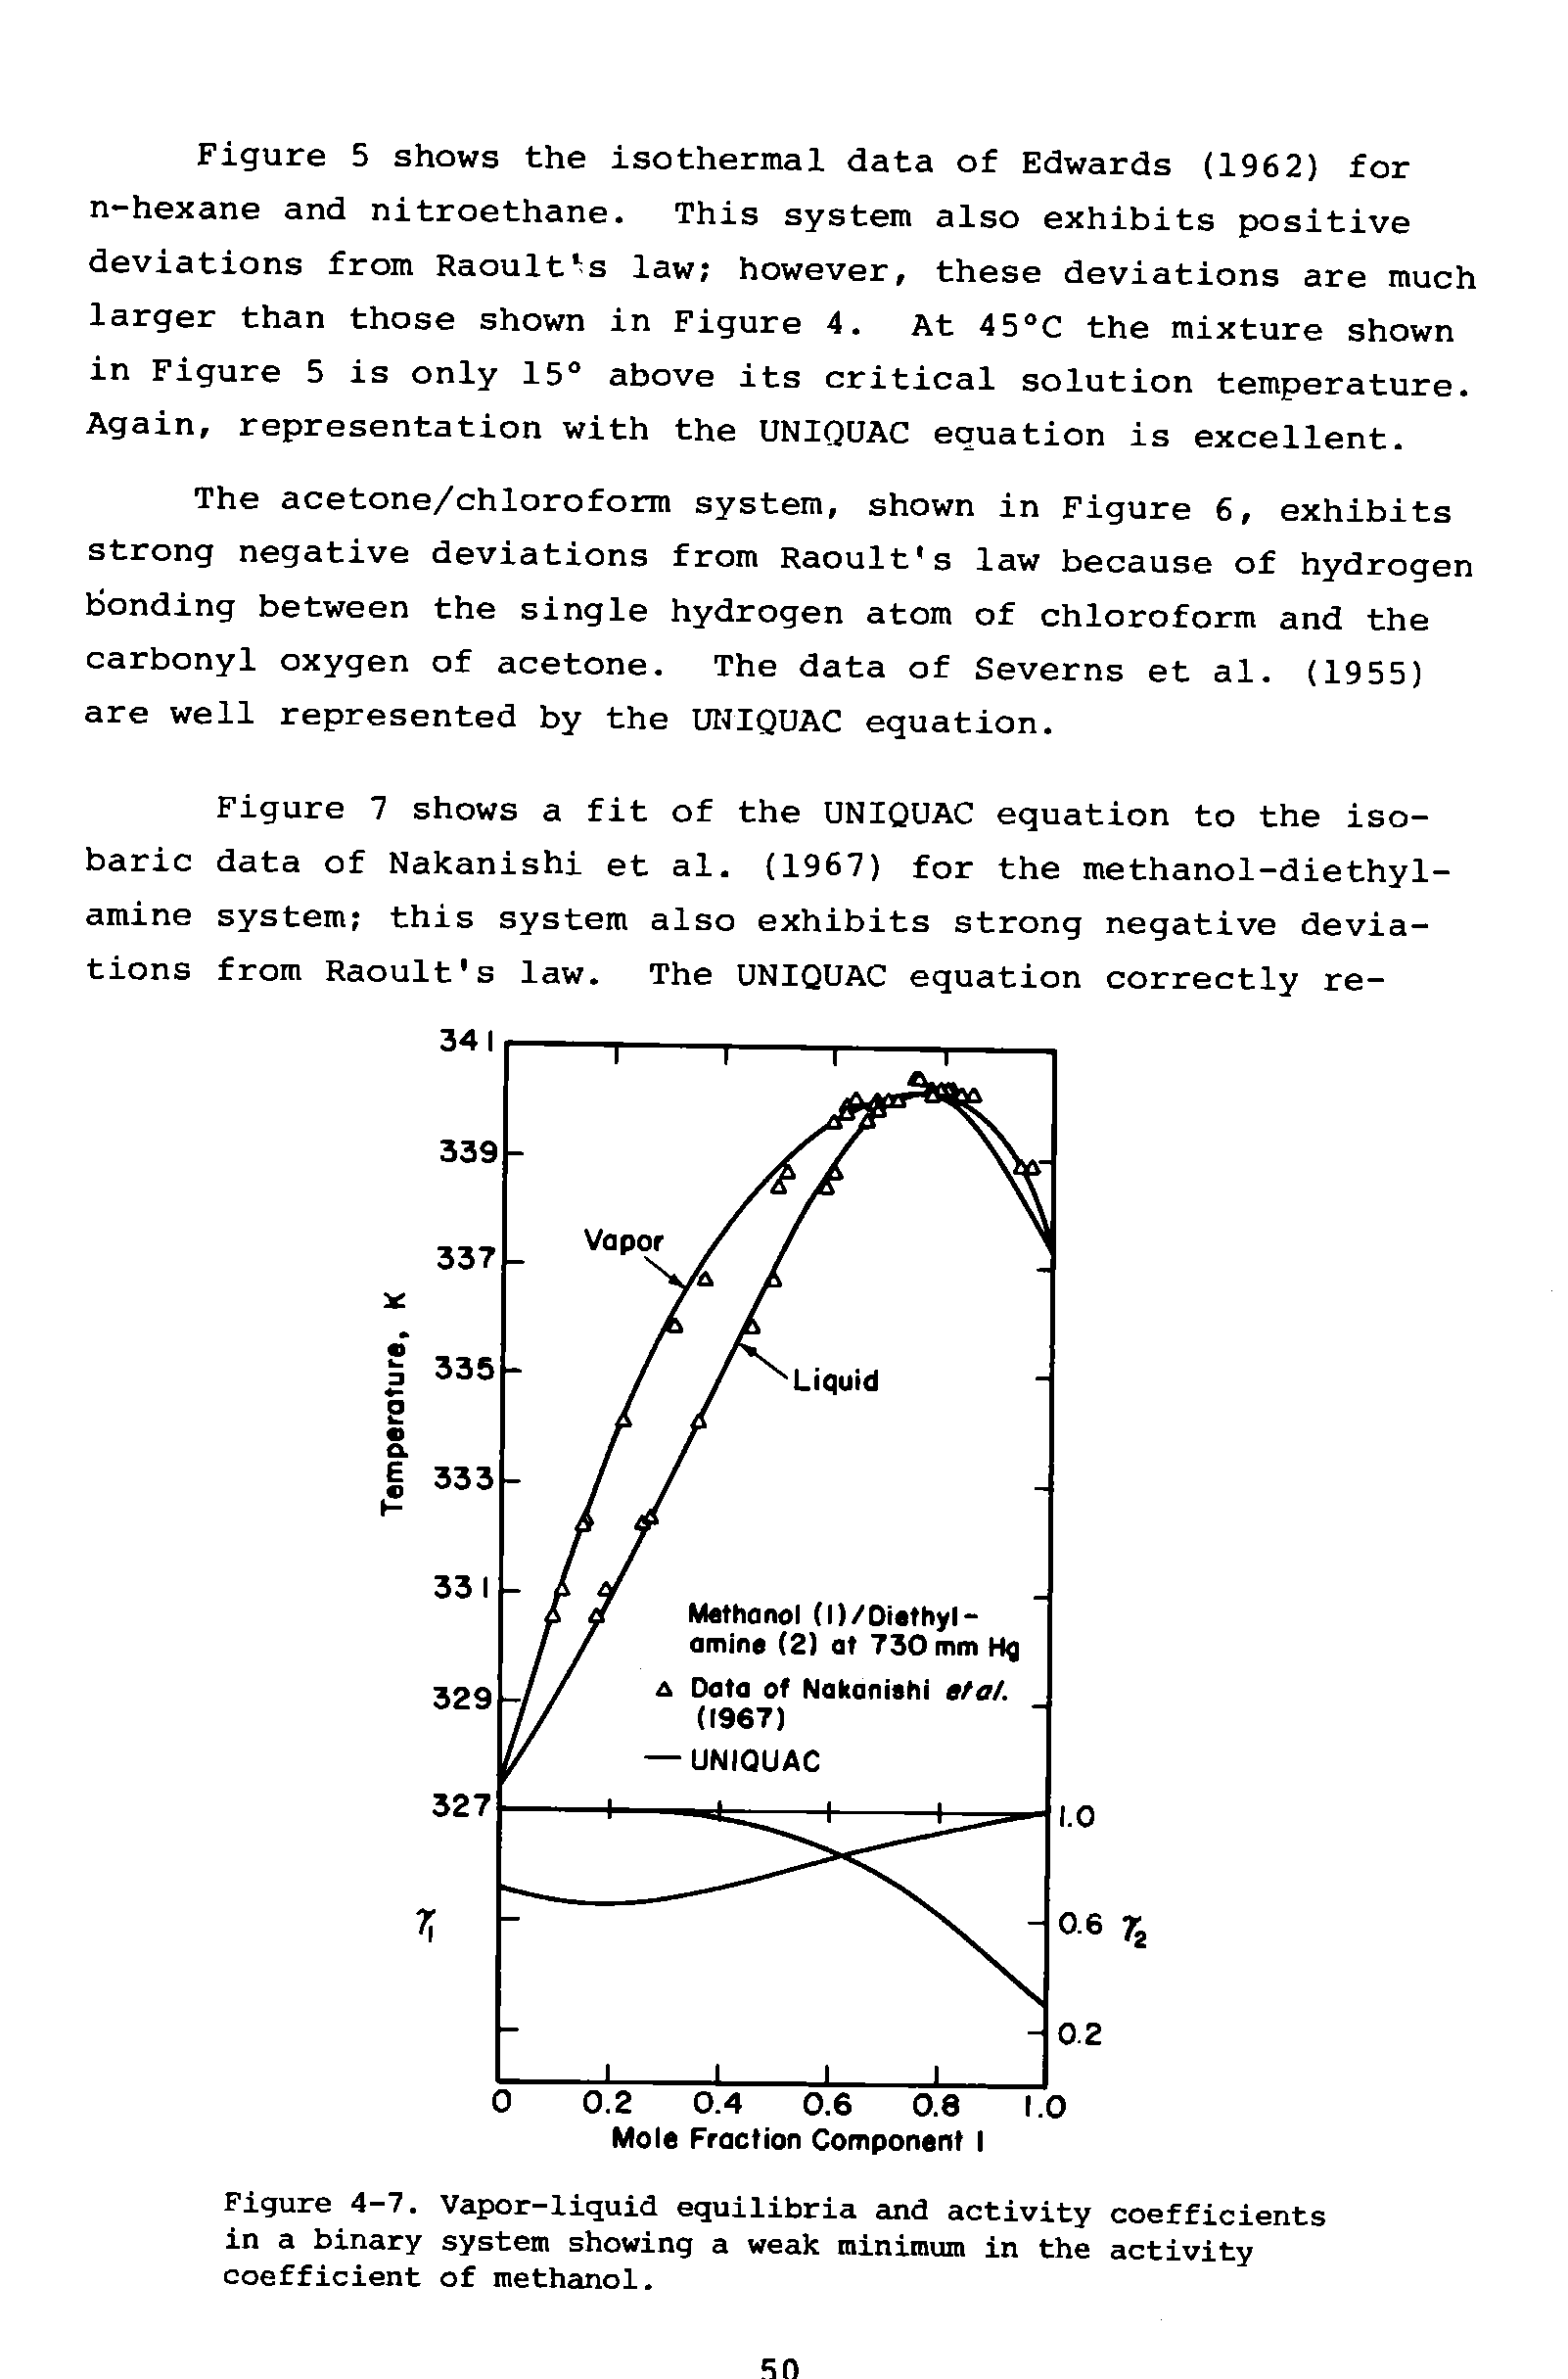 Figure 4-7. Vapor-liquid equilibria and activity coefficients in a binary system showing a weak minimum in the activity coefficient of methanol.